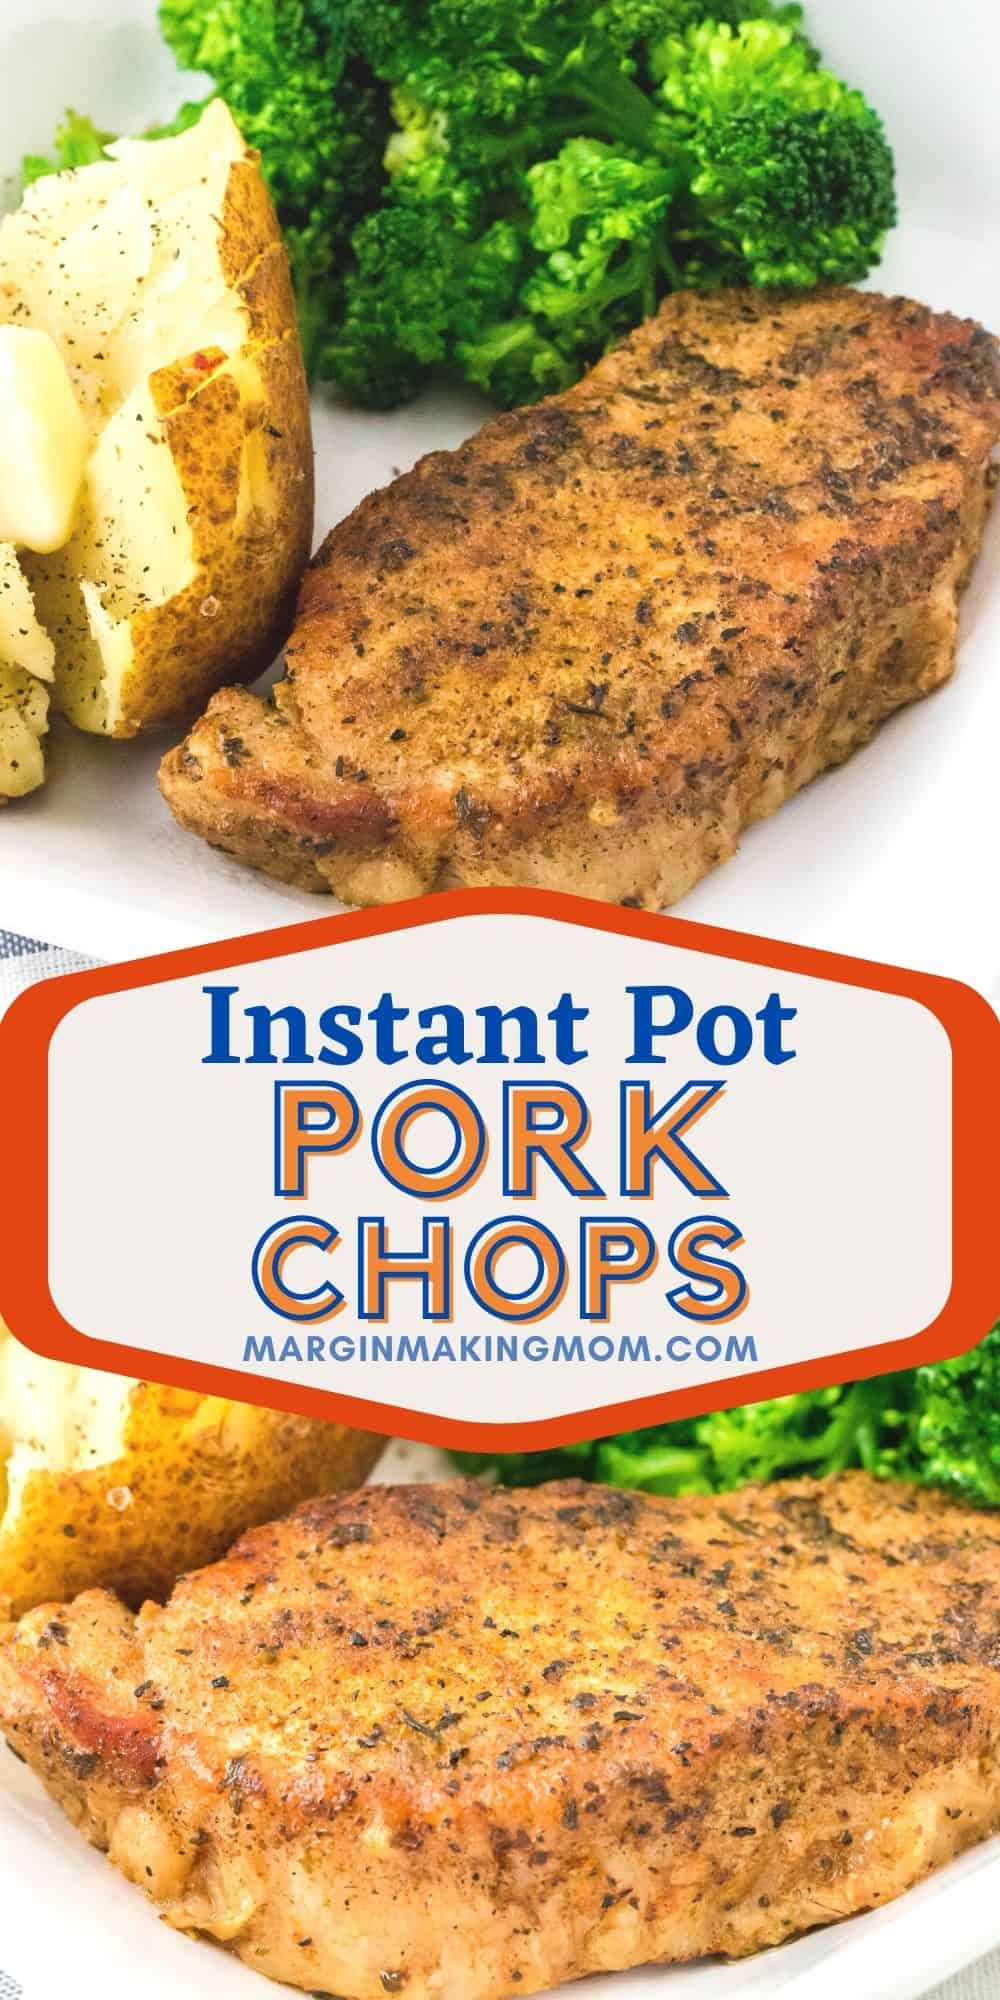 collage image with two photos of Instant Pot pork chops. One shows a close-up of the meat, while the other shows it on a plate with baked potato and broccoli.